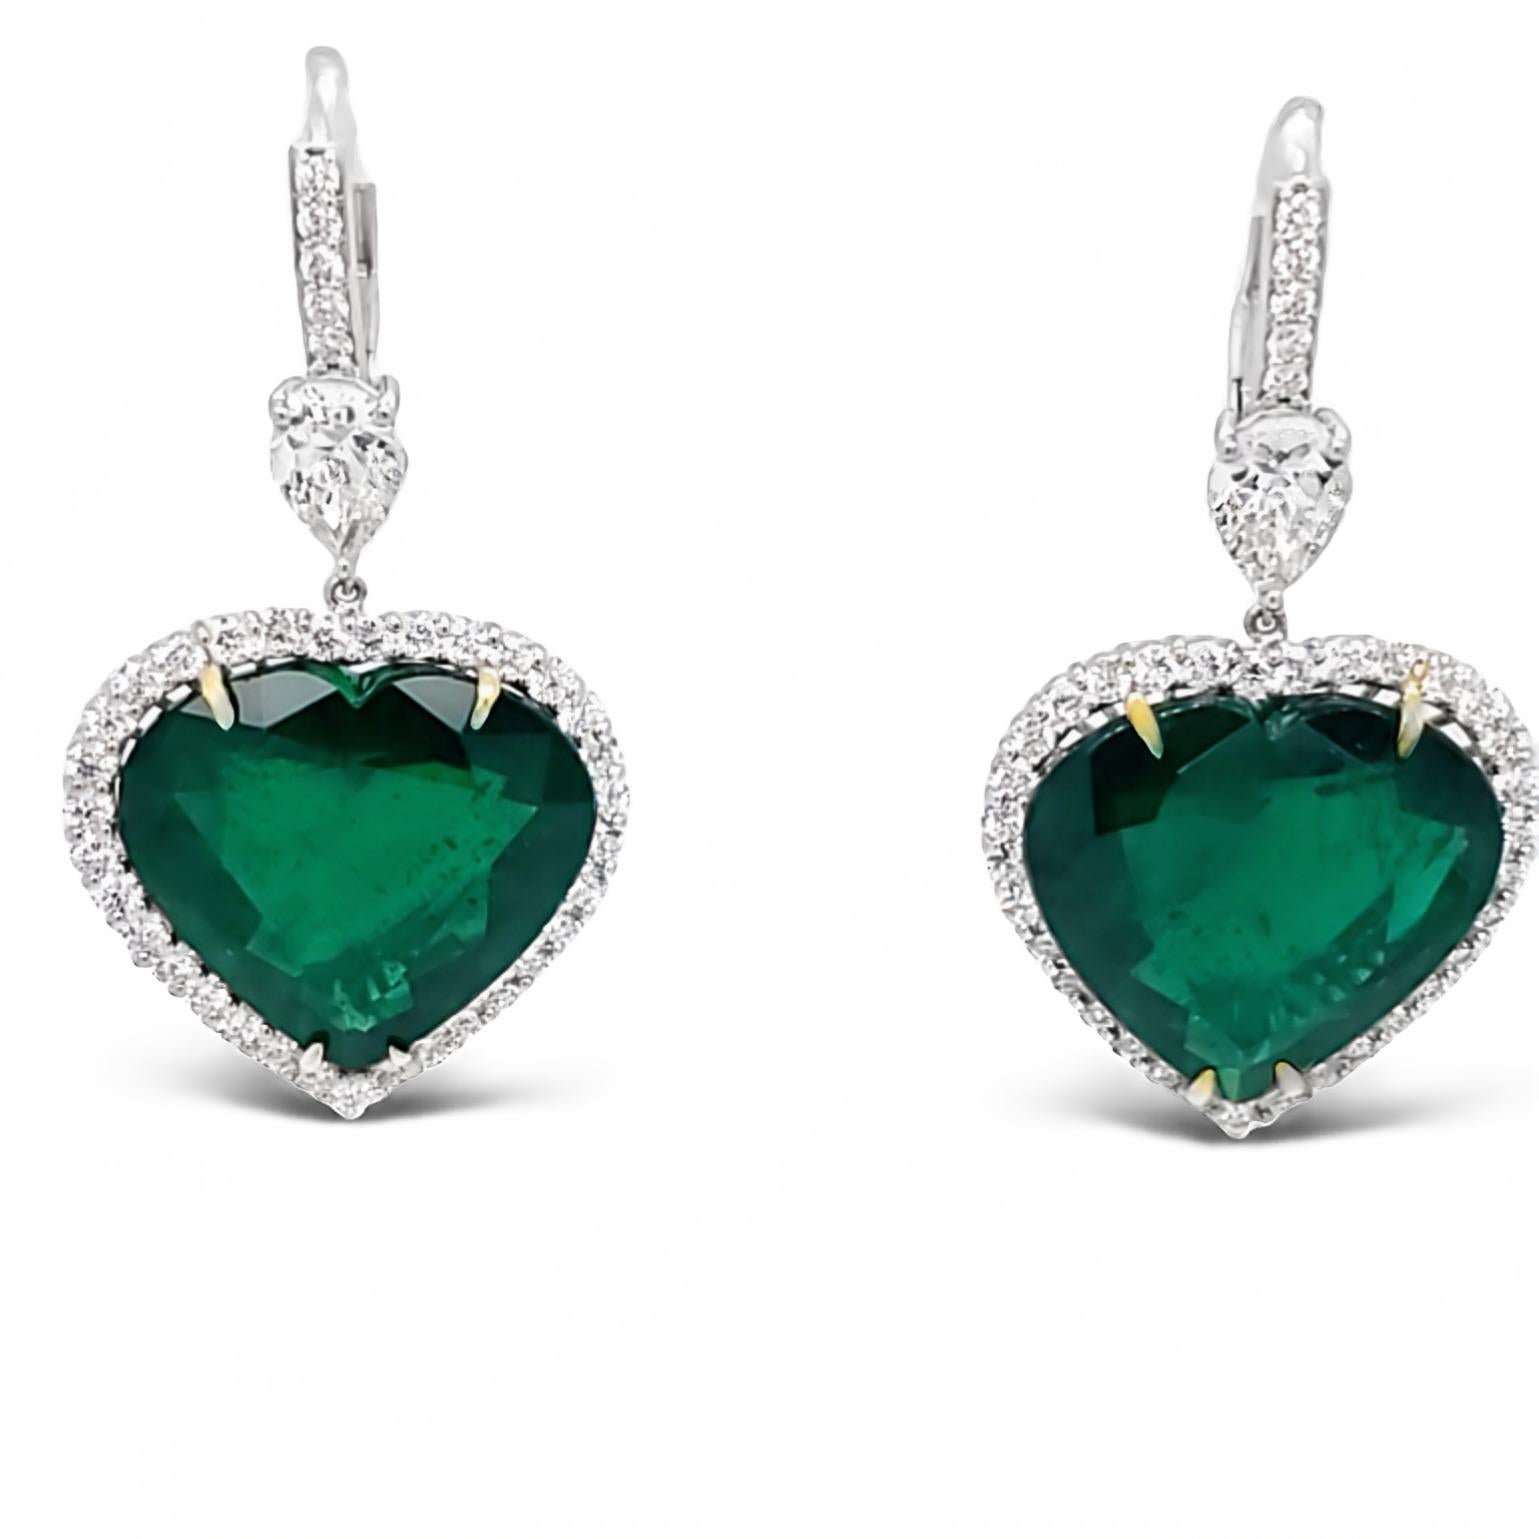 A beautifully matched green Zambian Emerald heart shape with superb luster and minimal gardening. These spectacular light weight dangling earrings also feature a matched pair of 1.42 carat total weight of collection pear shapes with an elegant micro